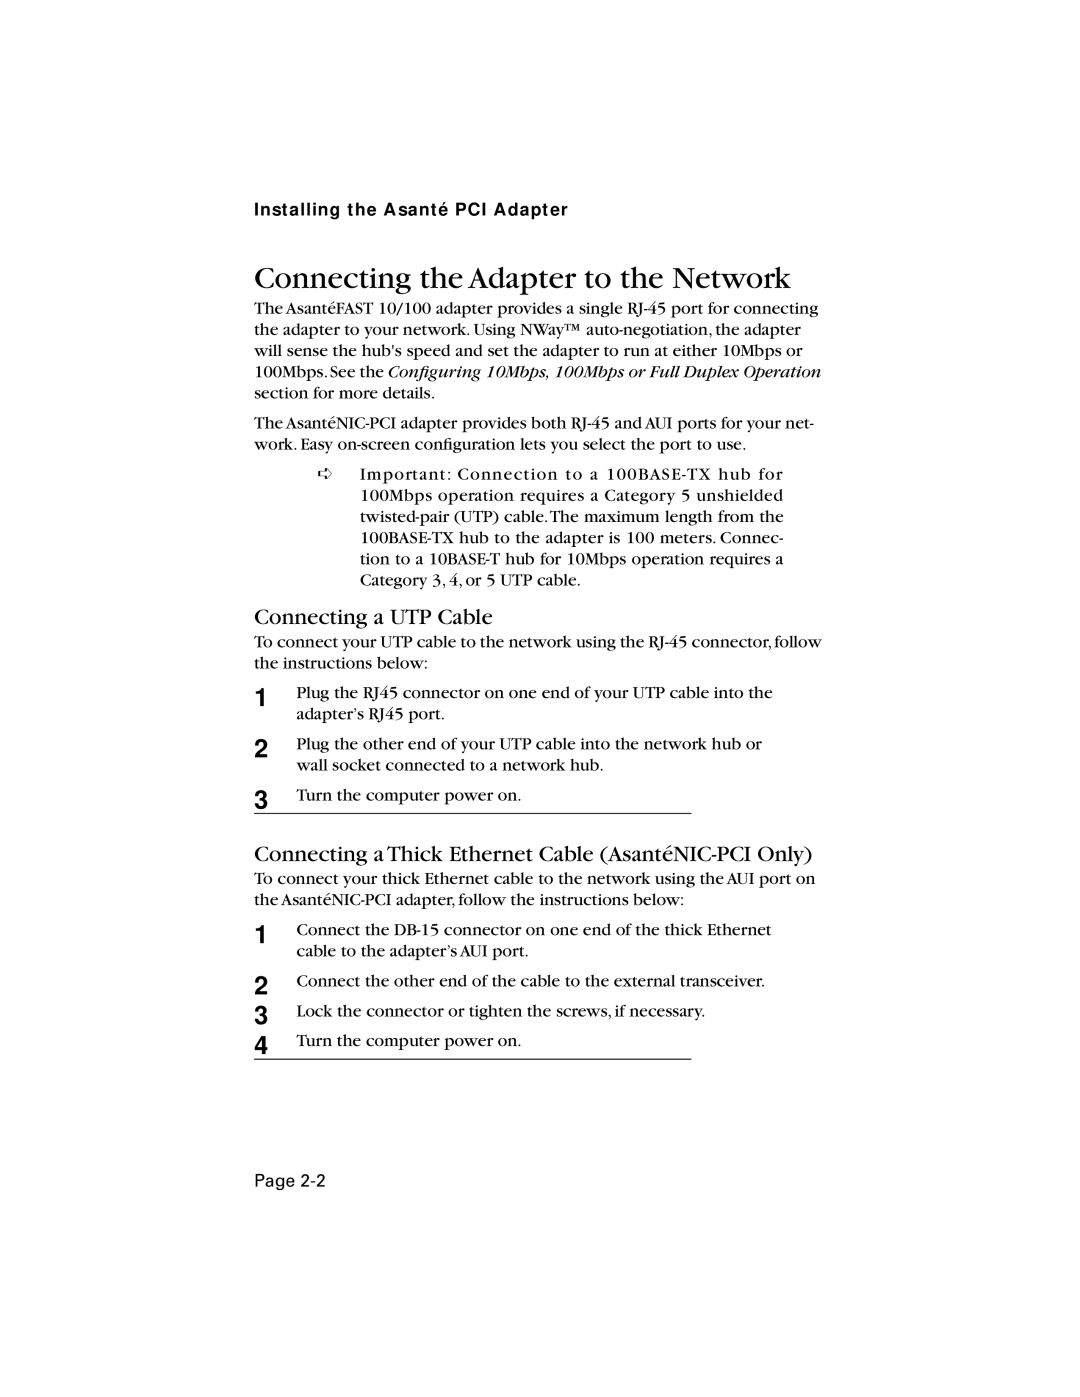 Asante Technologies 10/100 manual Connecting the Adapter to the Network, Connecting a UTP Cable 